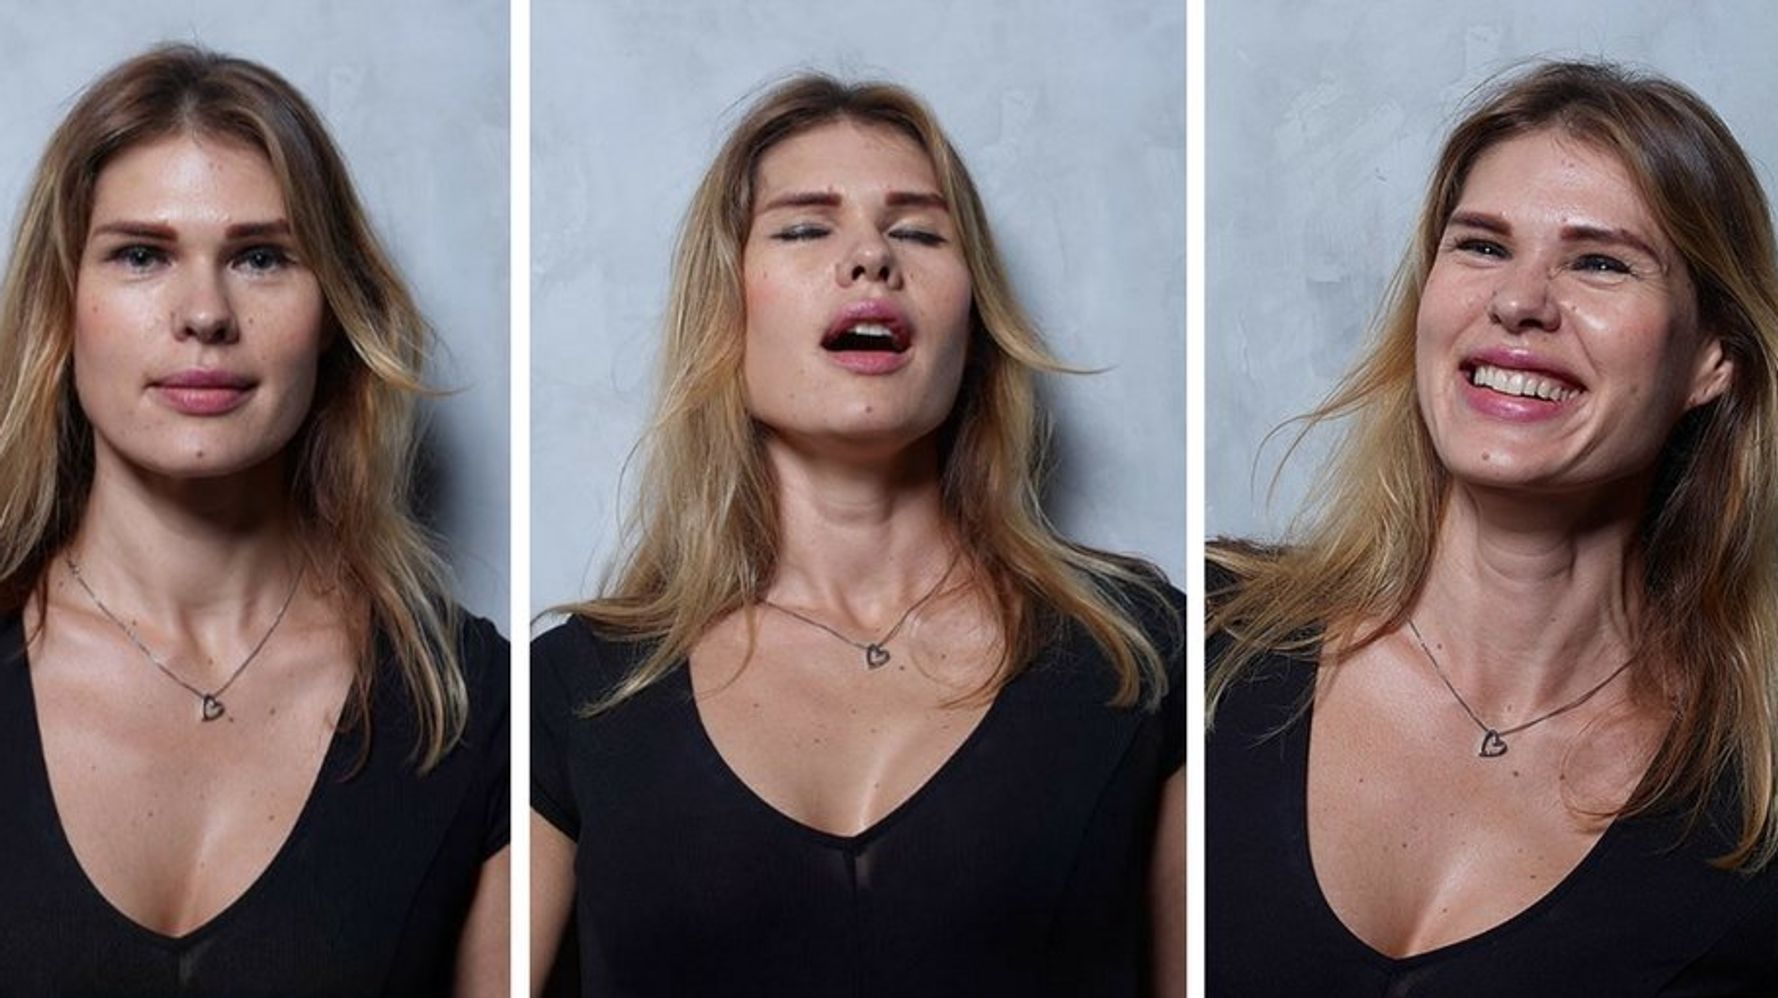 Tiny Teen Orgasm - This Photo Series Captures Women Before, During And After ...